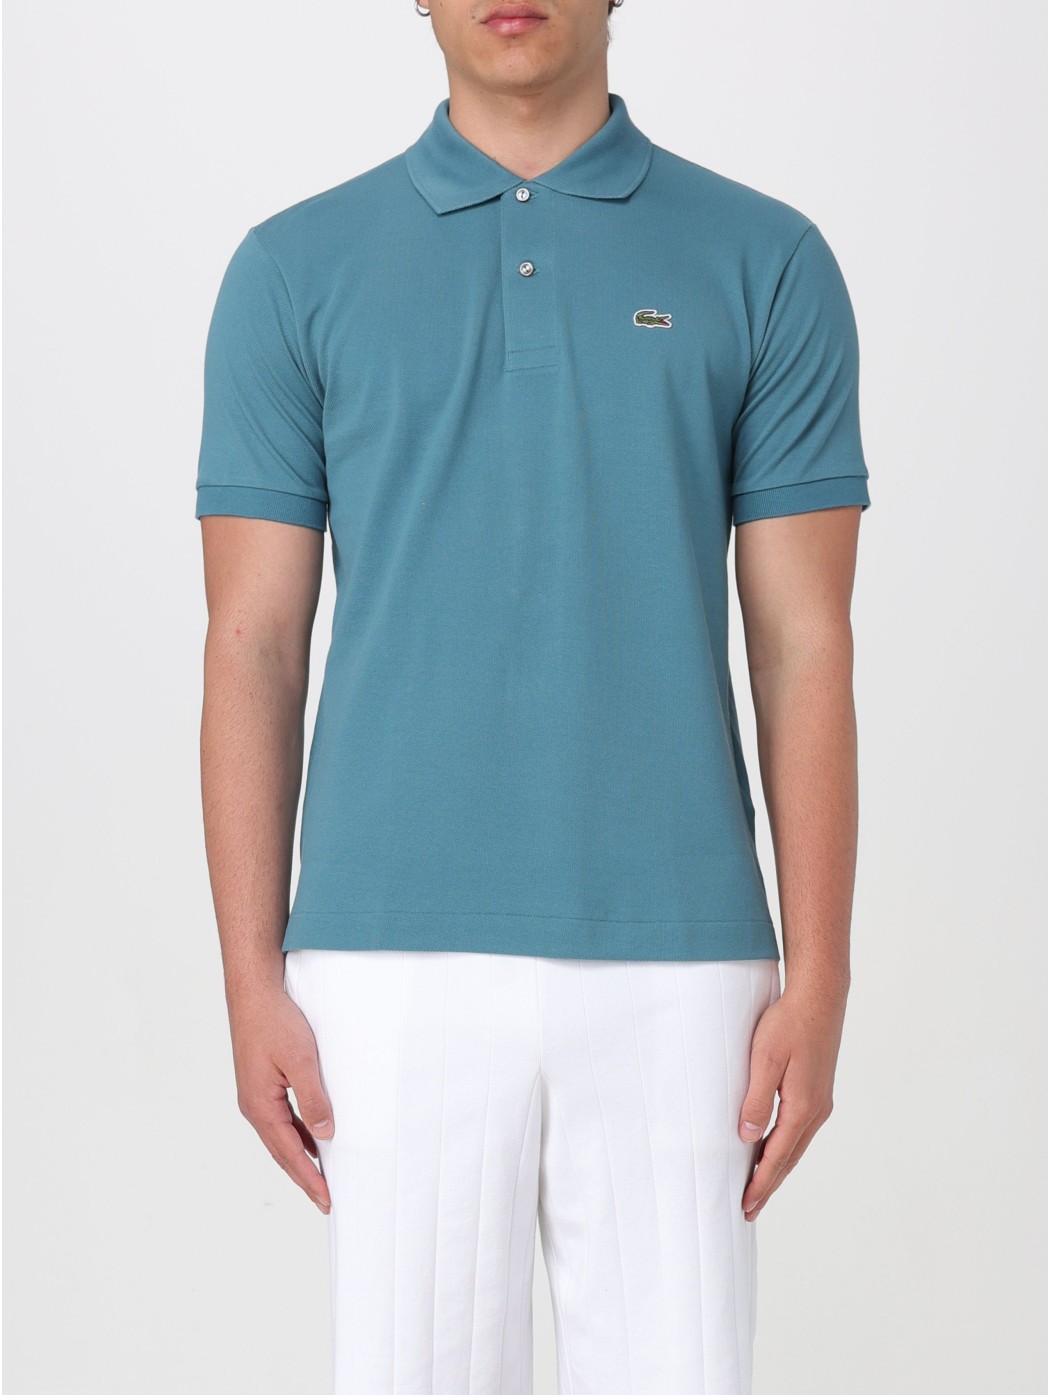 BEST POLO M/C LACOSTE 1212 IY4